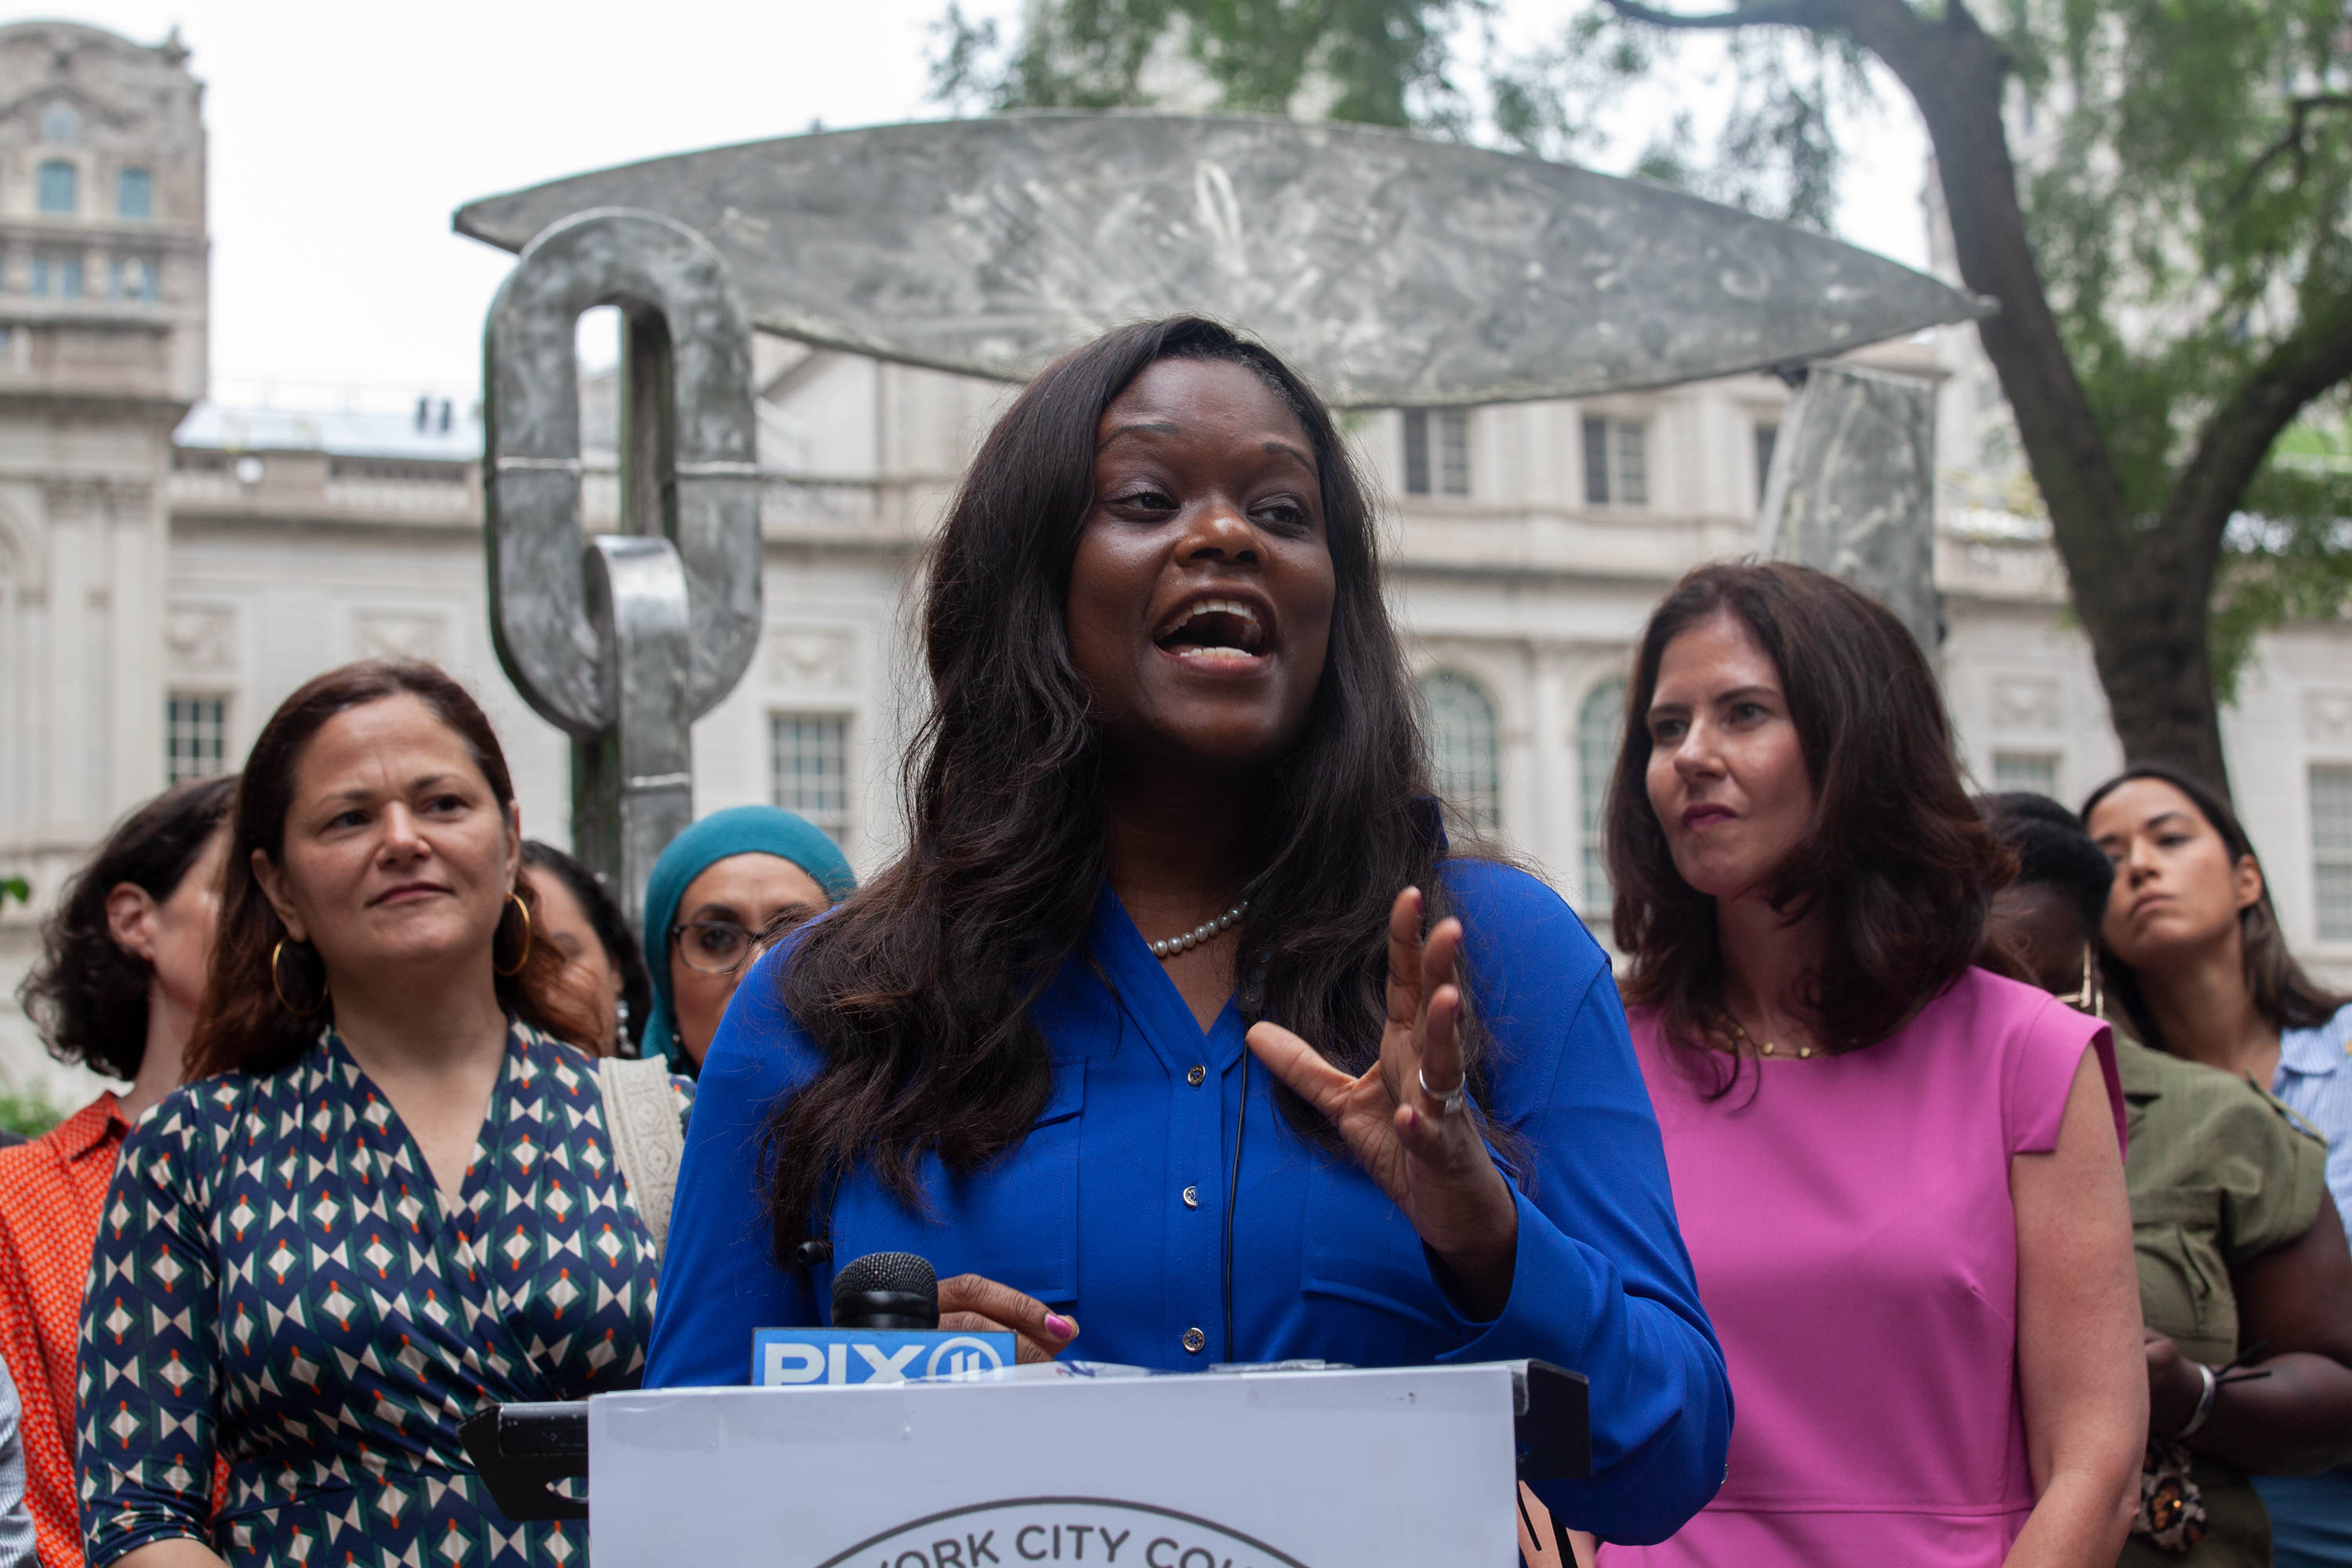 State Assemblymember Rodneyse Bichotte Hermelyn speaks at a rally in City Hall Park supporting female candidates, July 13, 2021.